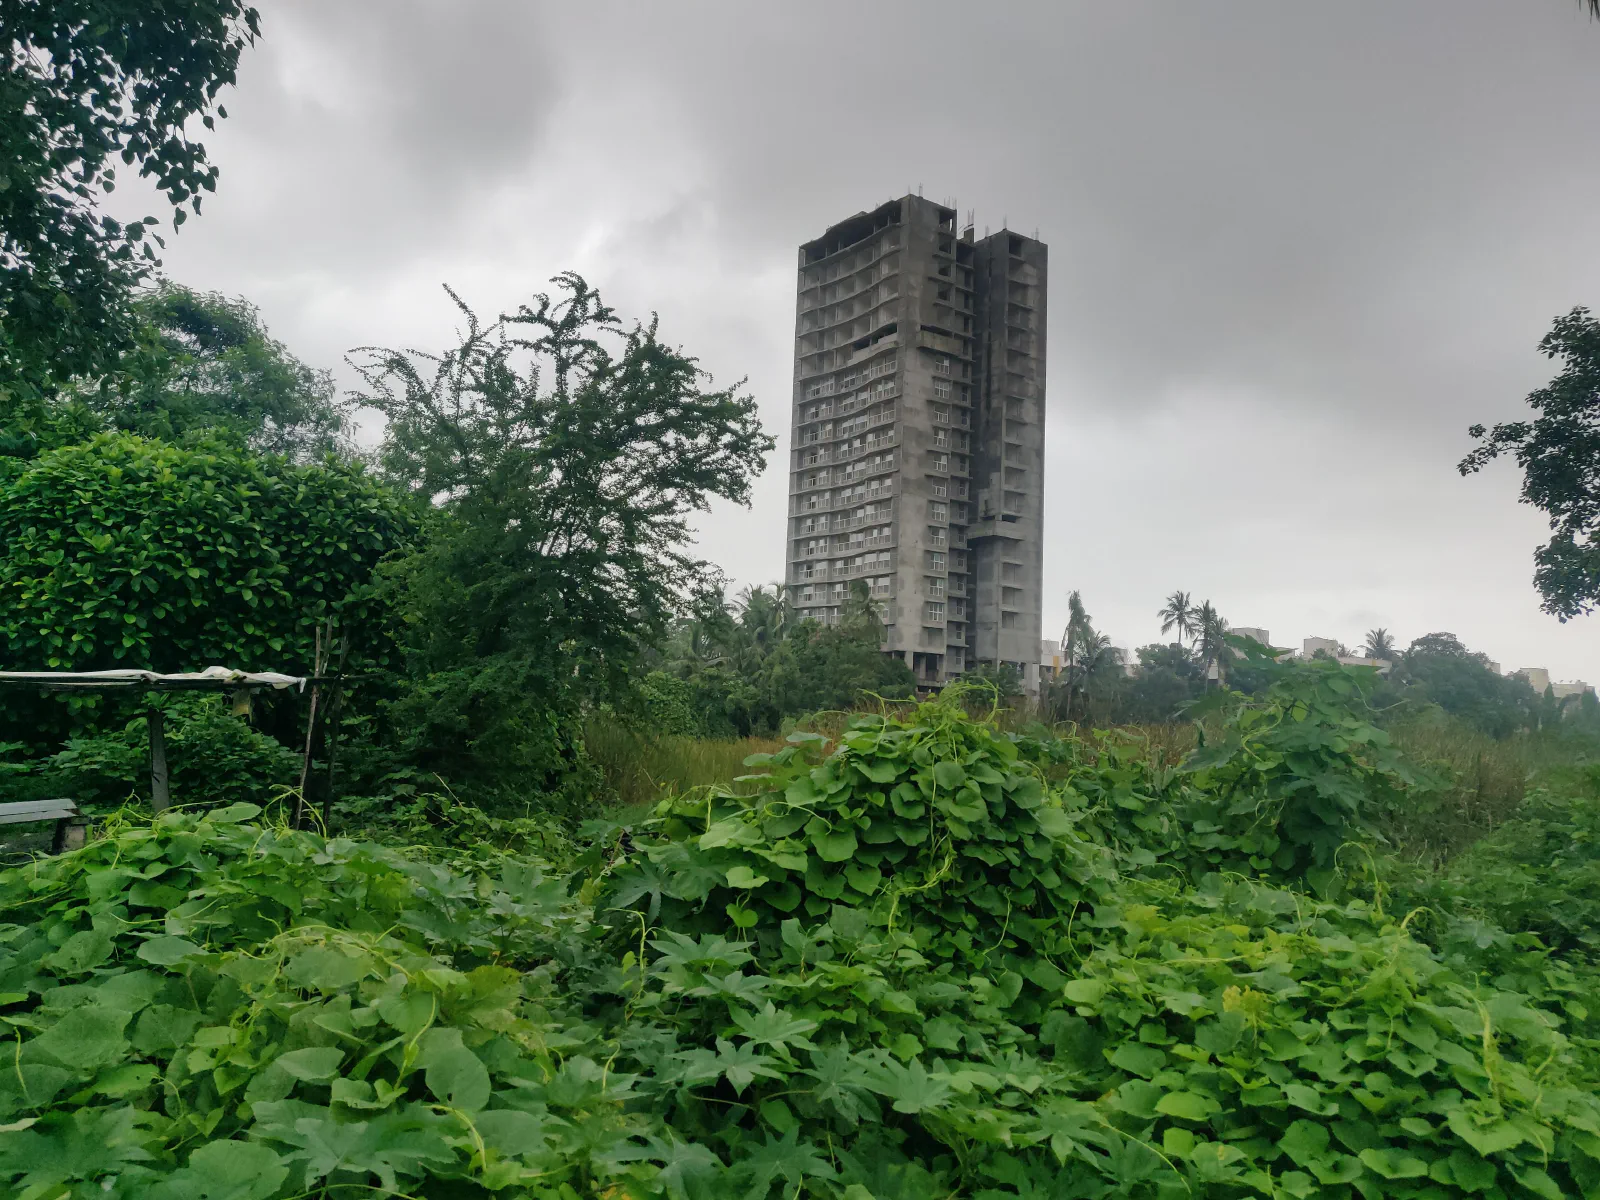 Tall grey building in a green field.